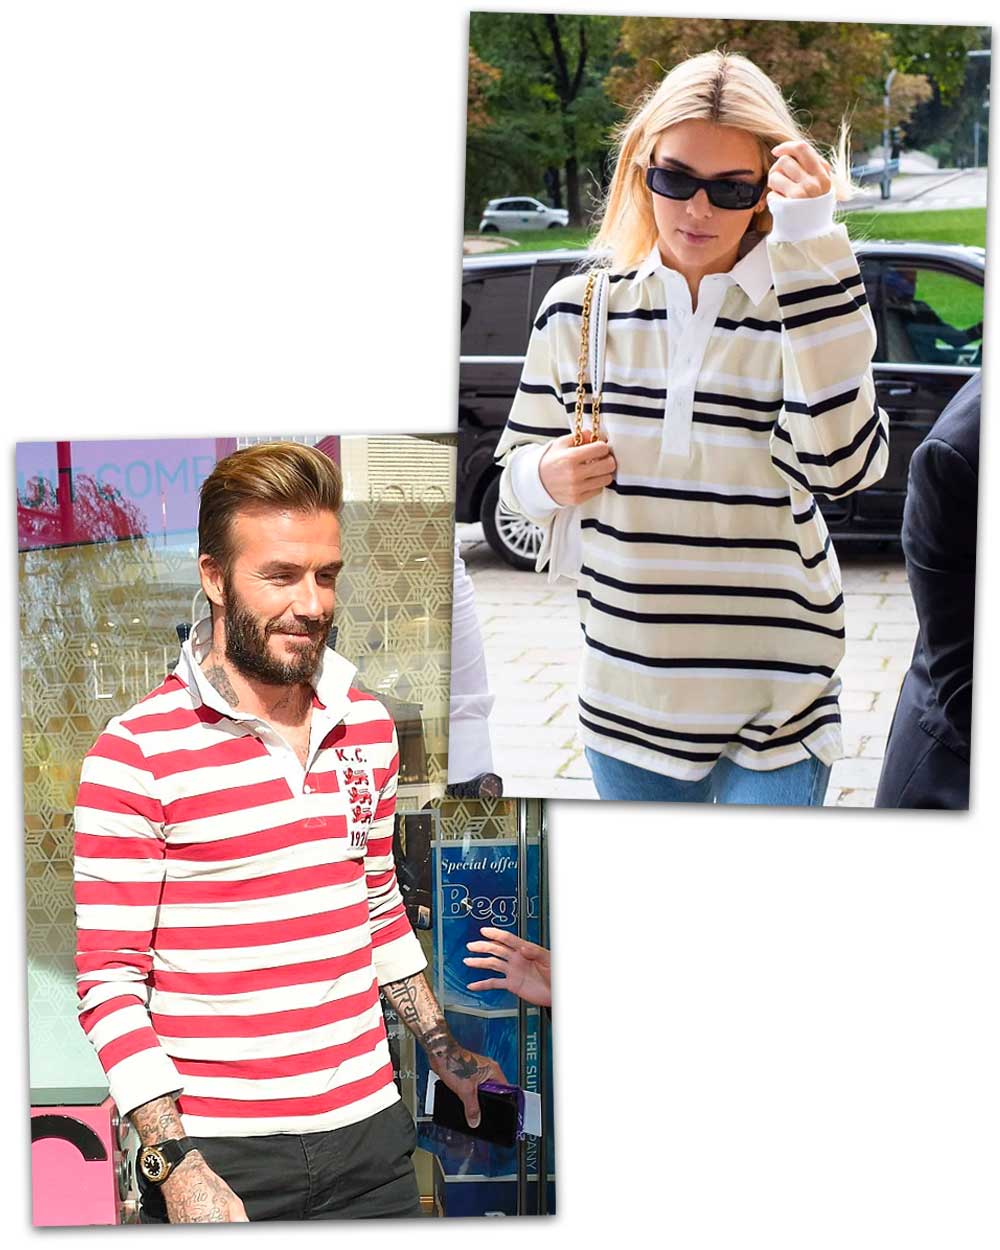 Preppy Rugby Shirts David Beckham and Kendall Jenner